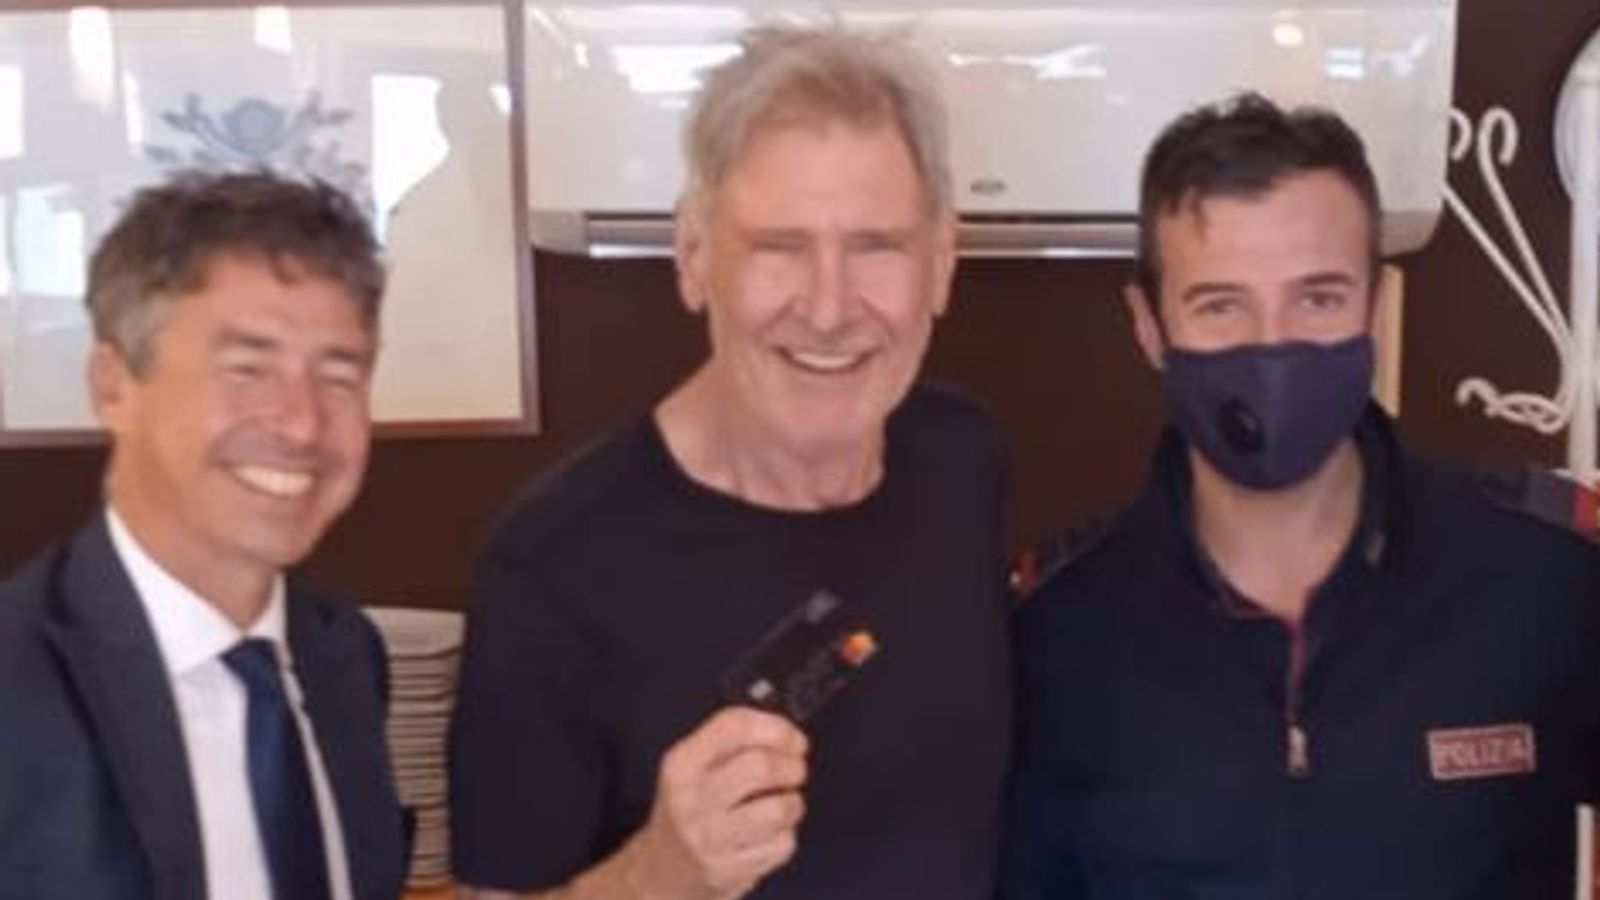 Harrison Ford’s lost credit credit returned after being found by tourist in Sicily